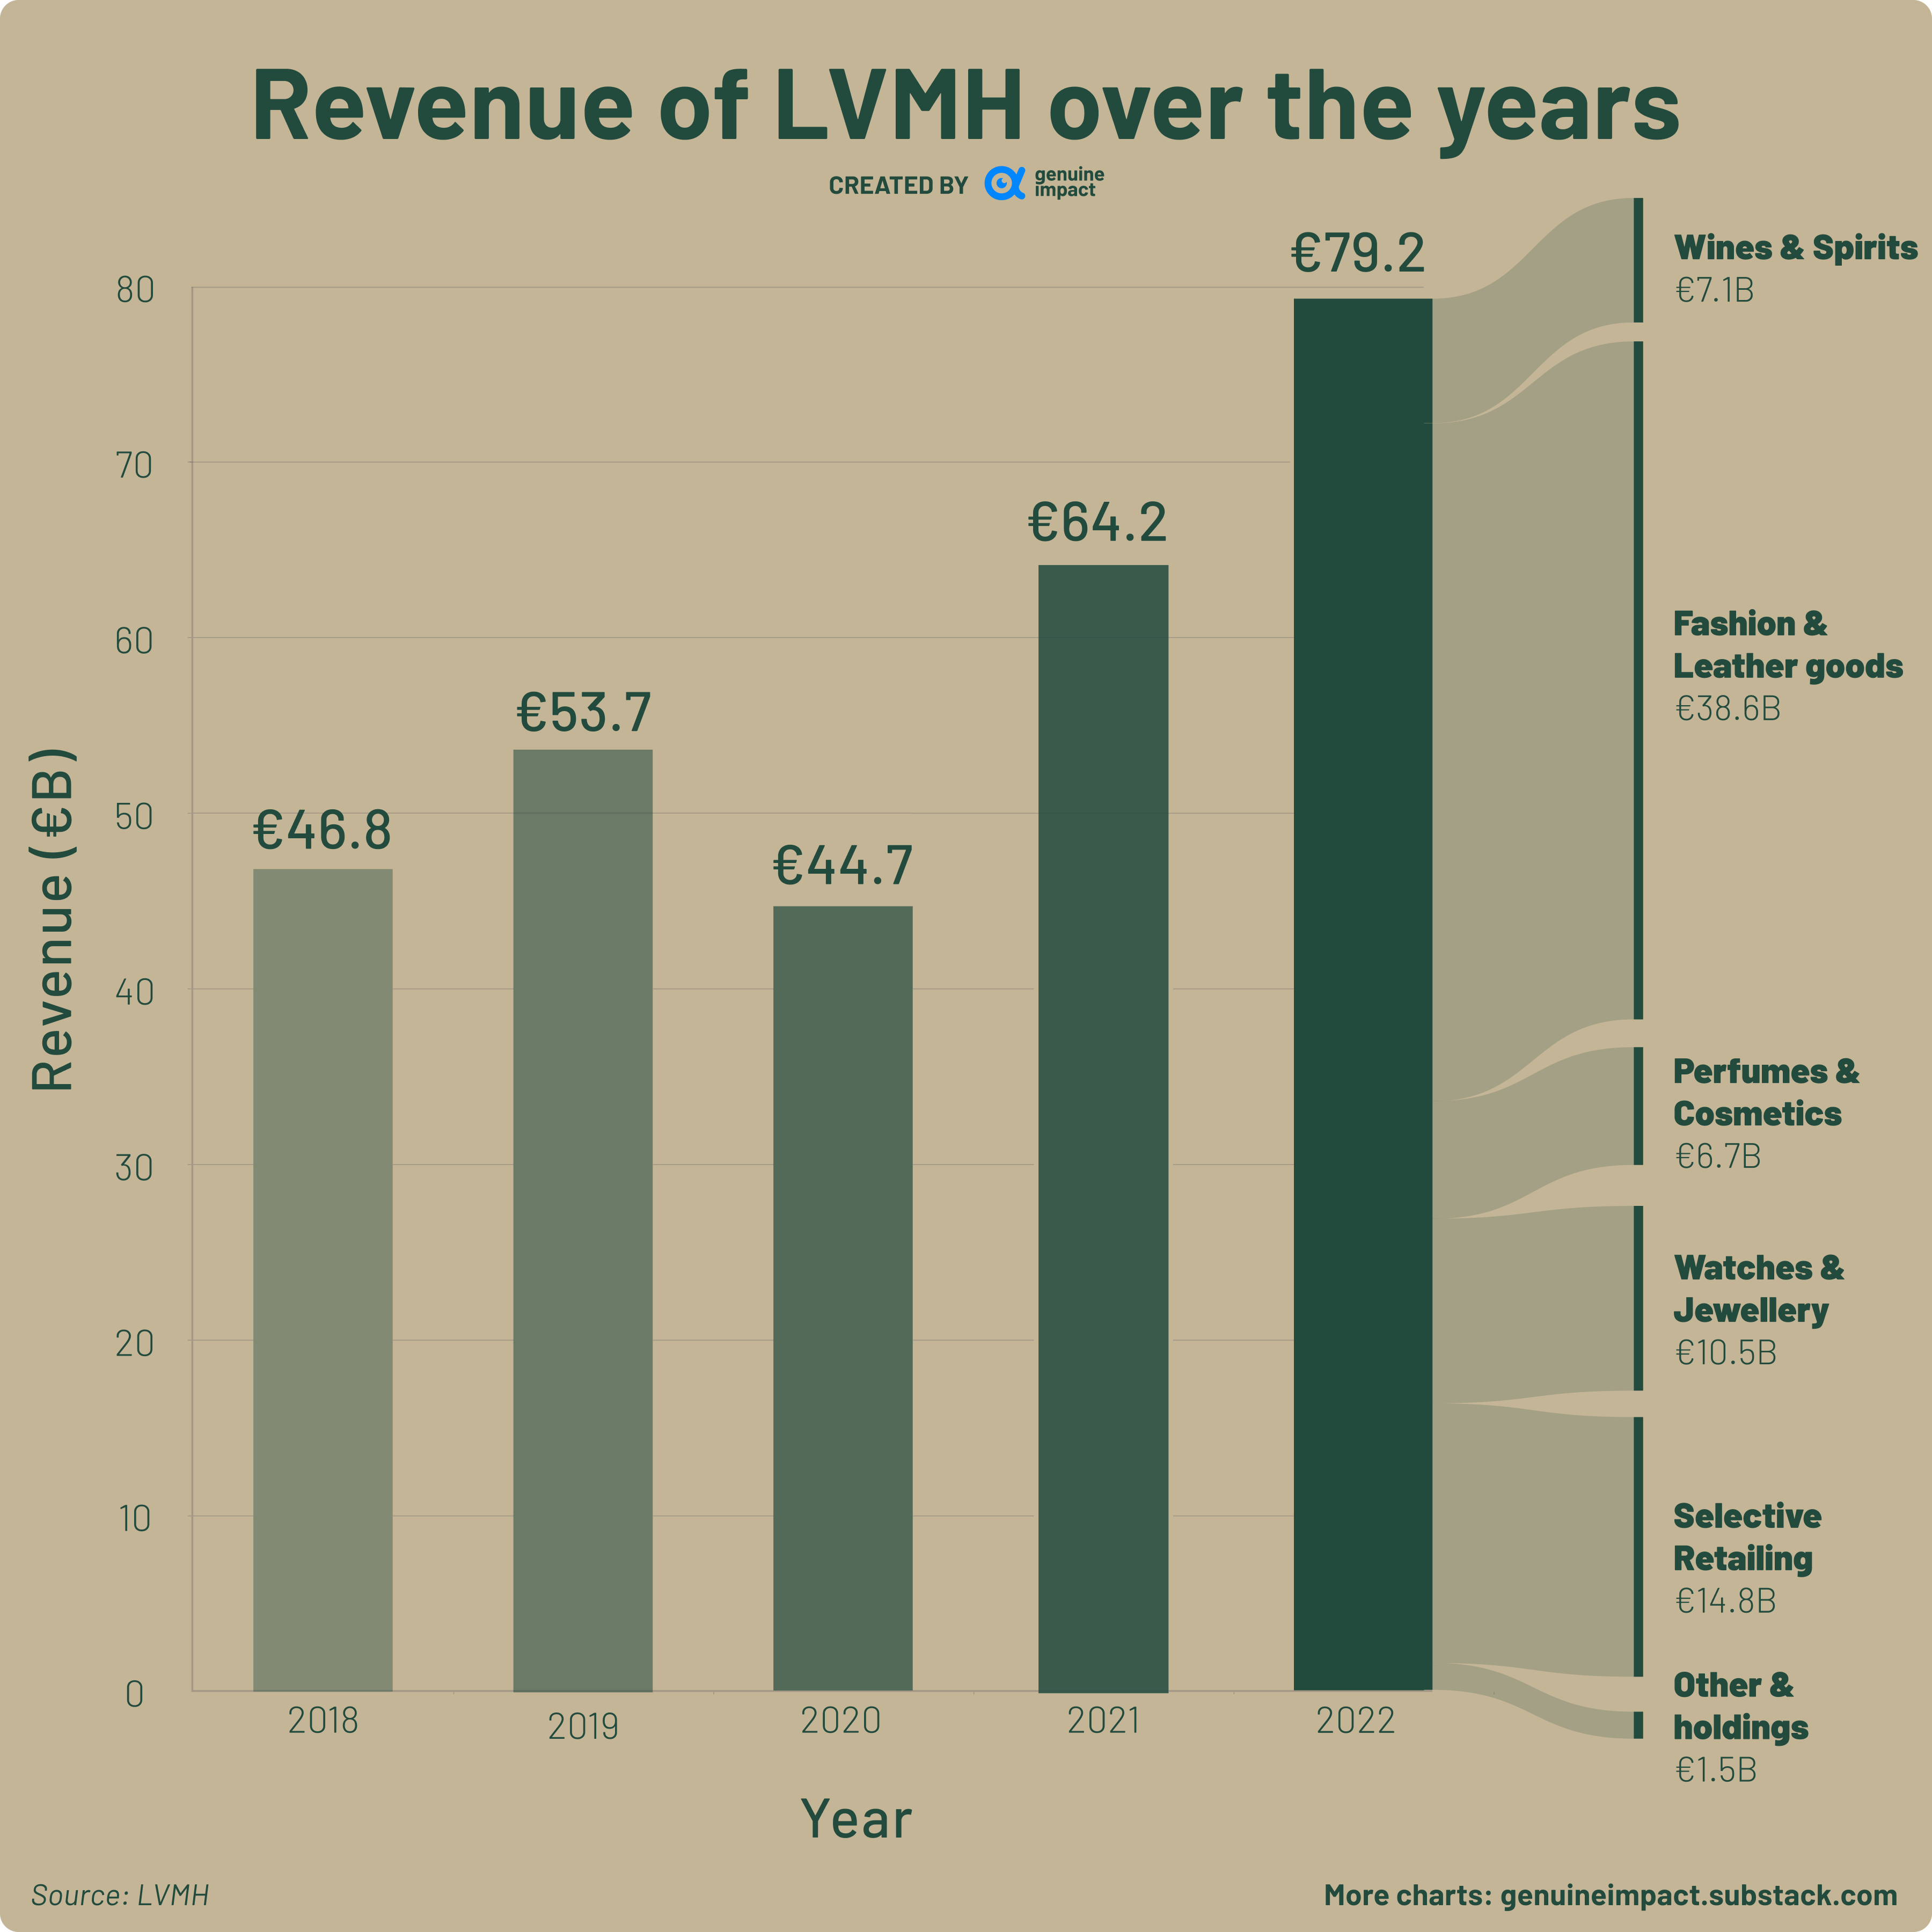 What LVMH's Belmond Buy Means for the Future of Luxury Travel